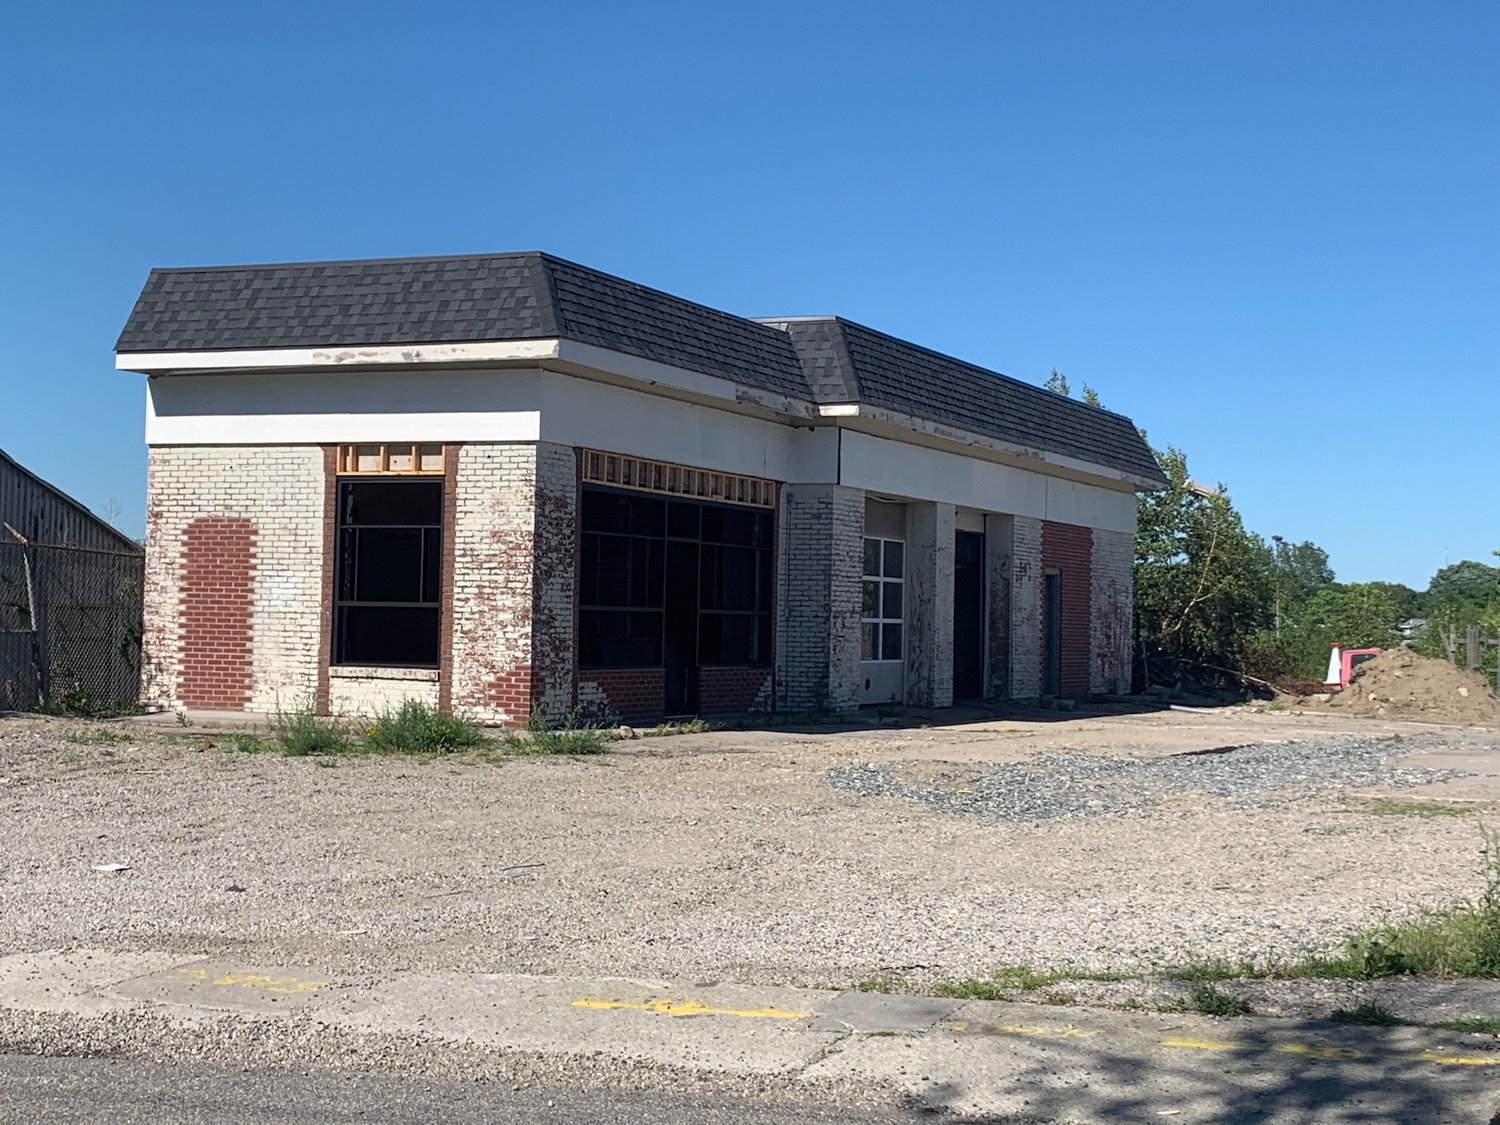 Local chef and restauranteur Nick Rabar plans to convert the old gas station on the former Getty Oil property at Massasoit Avenue and Dexter Road into a "southern style" restaurant.